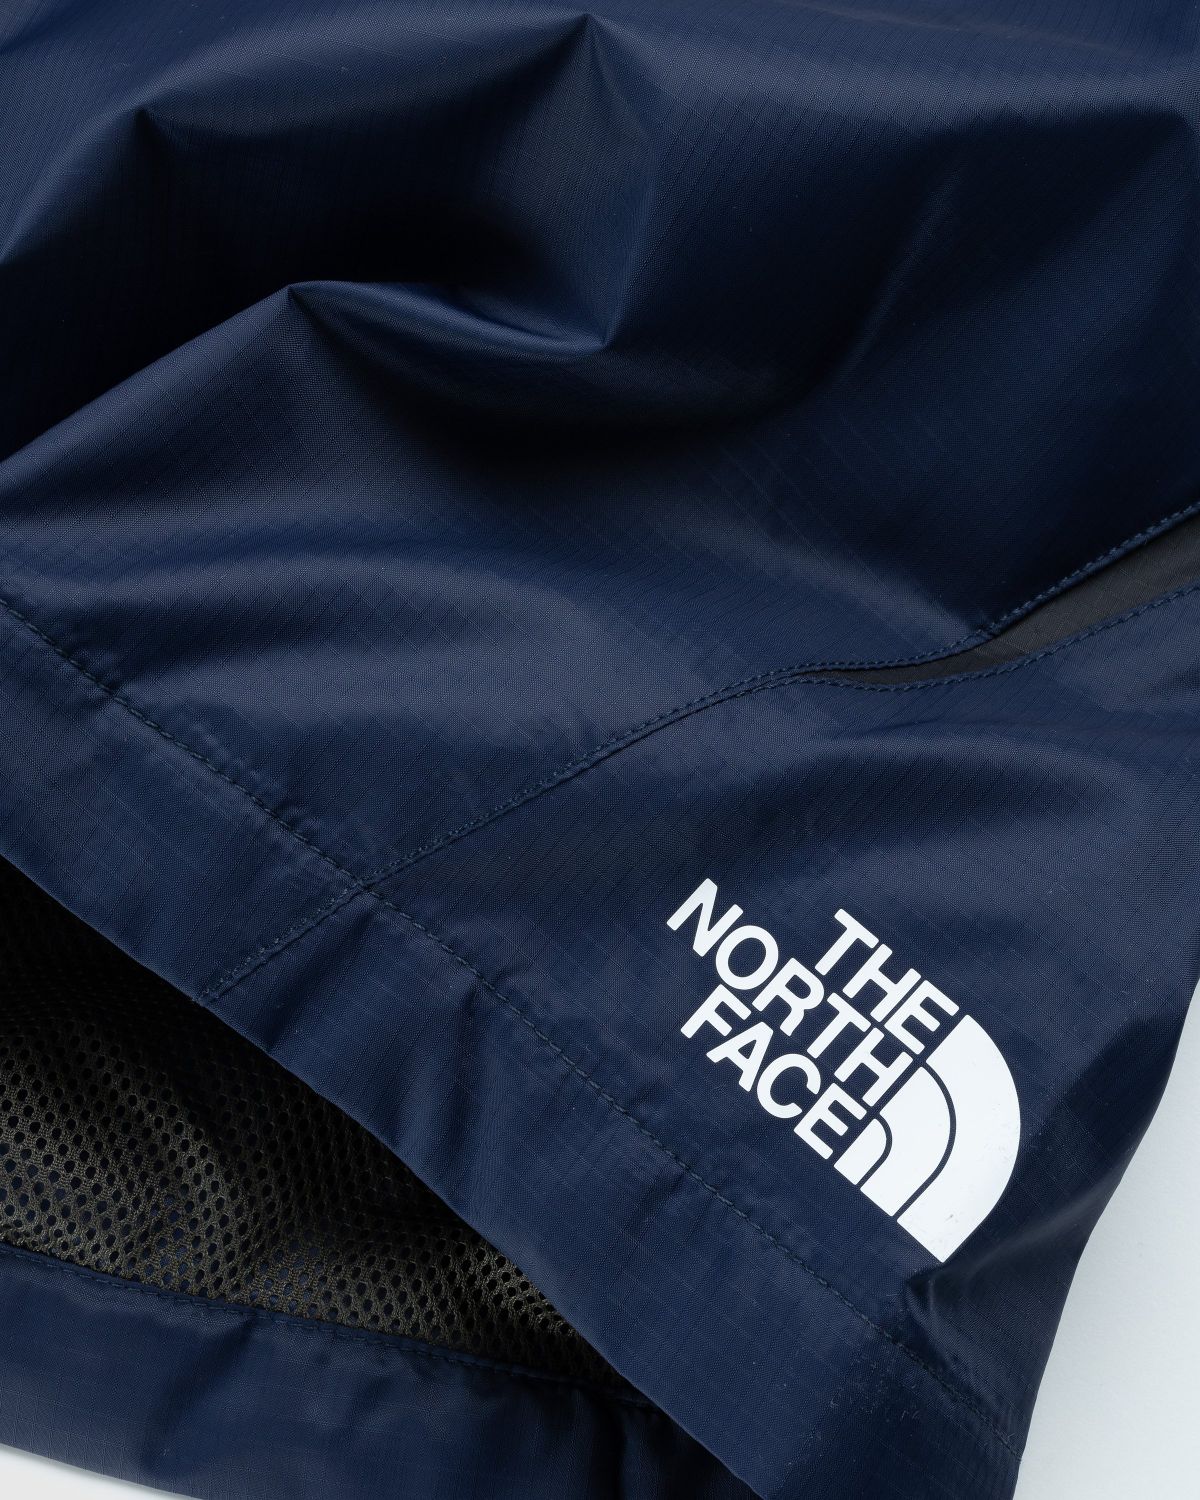 The North Face – TNF X Shorts Blue - Shorts - Blue - Image 5